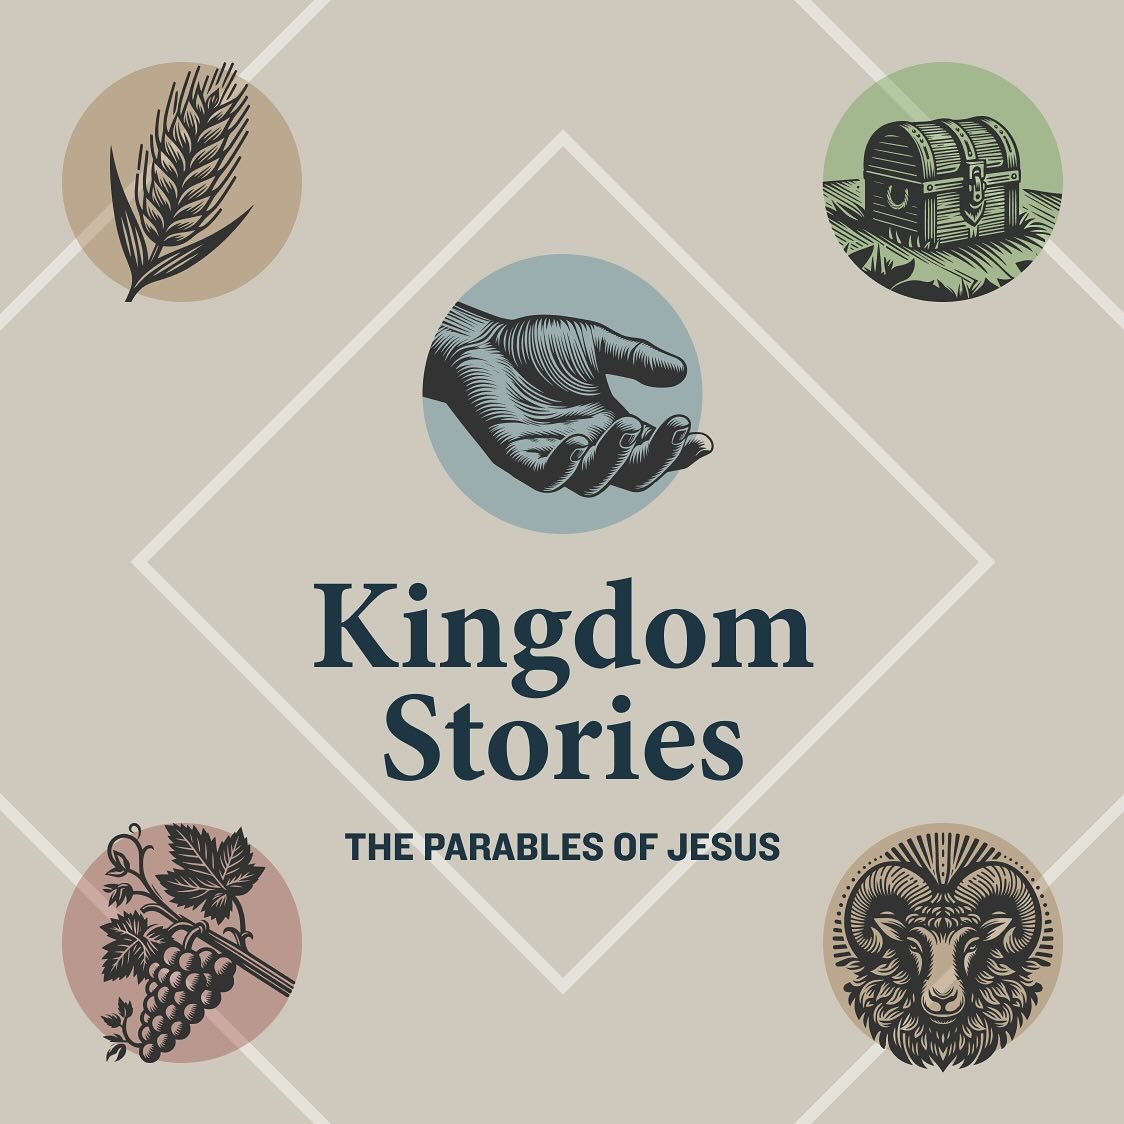 When questioned about the kingdom of God, Jesus most consistently answered in parable stories. These kingdom stories gave Jesus&rsquo; followers a beautiful, imagination-shaping effect into what the work of God&rsquo;s people would be like in the wor